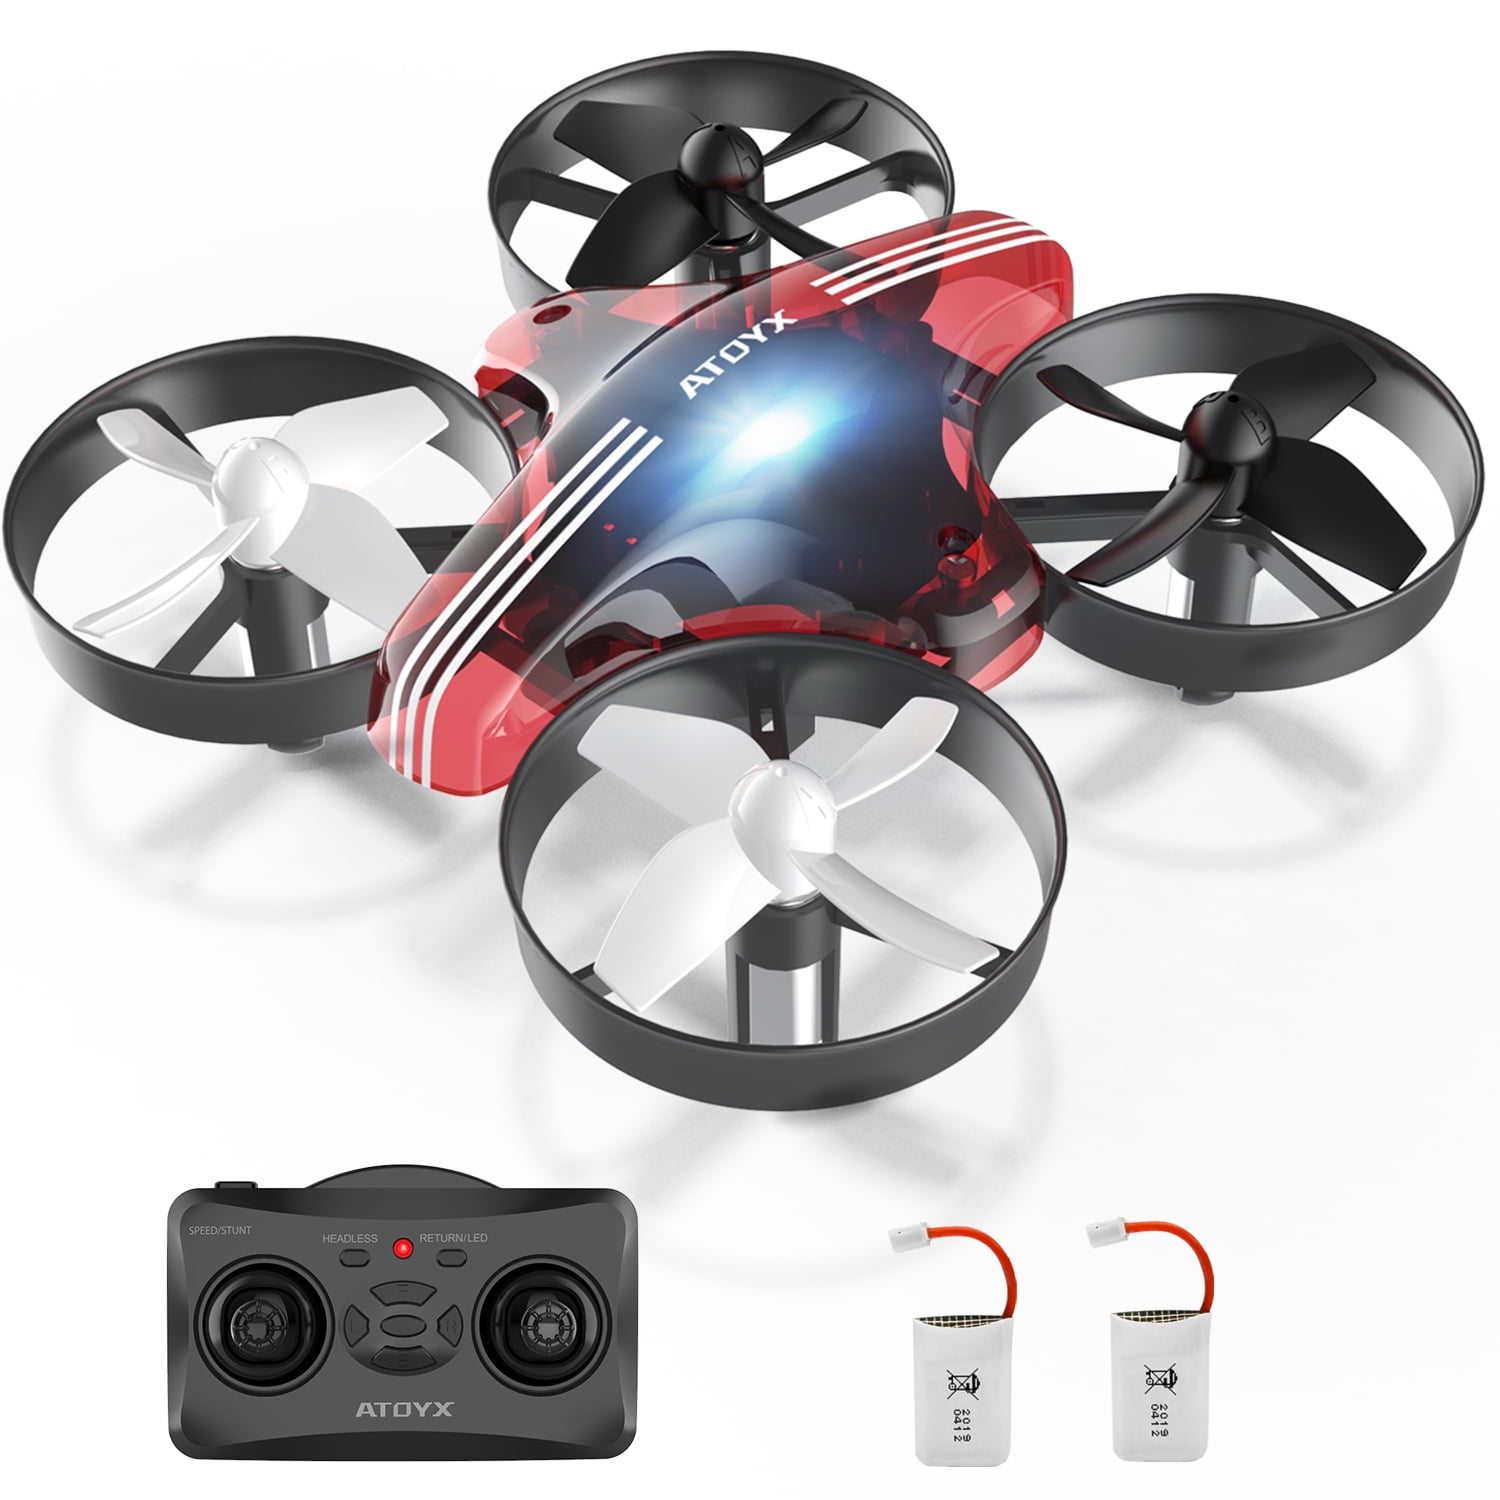 ATOYX Mini Drone for Kids with Colorful LED Lights,Remote Control